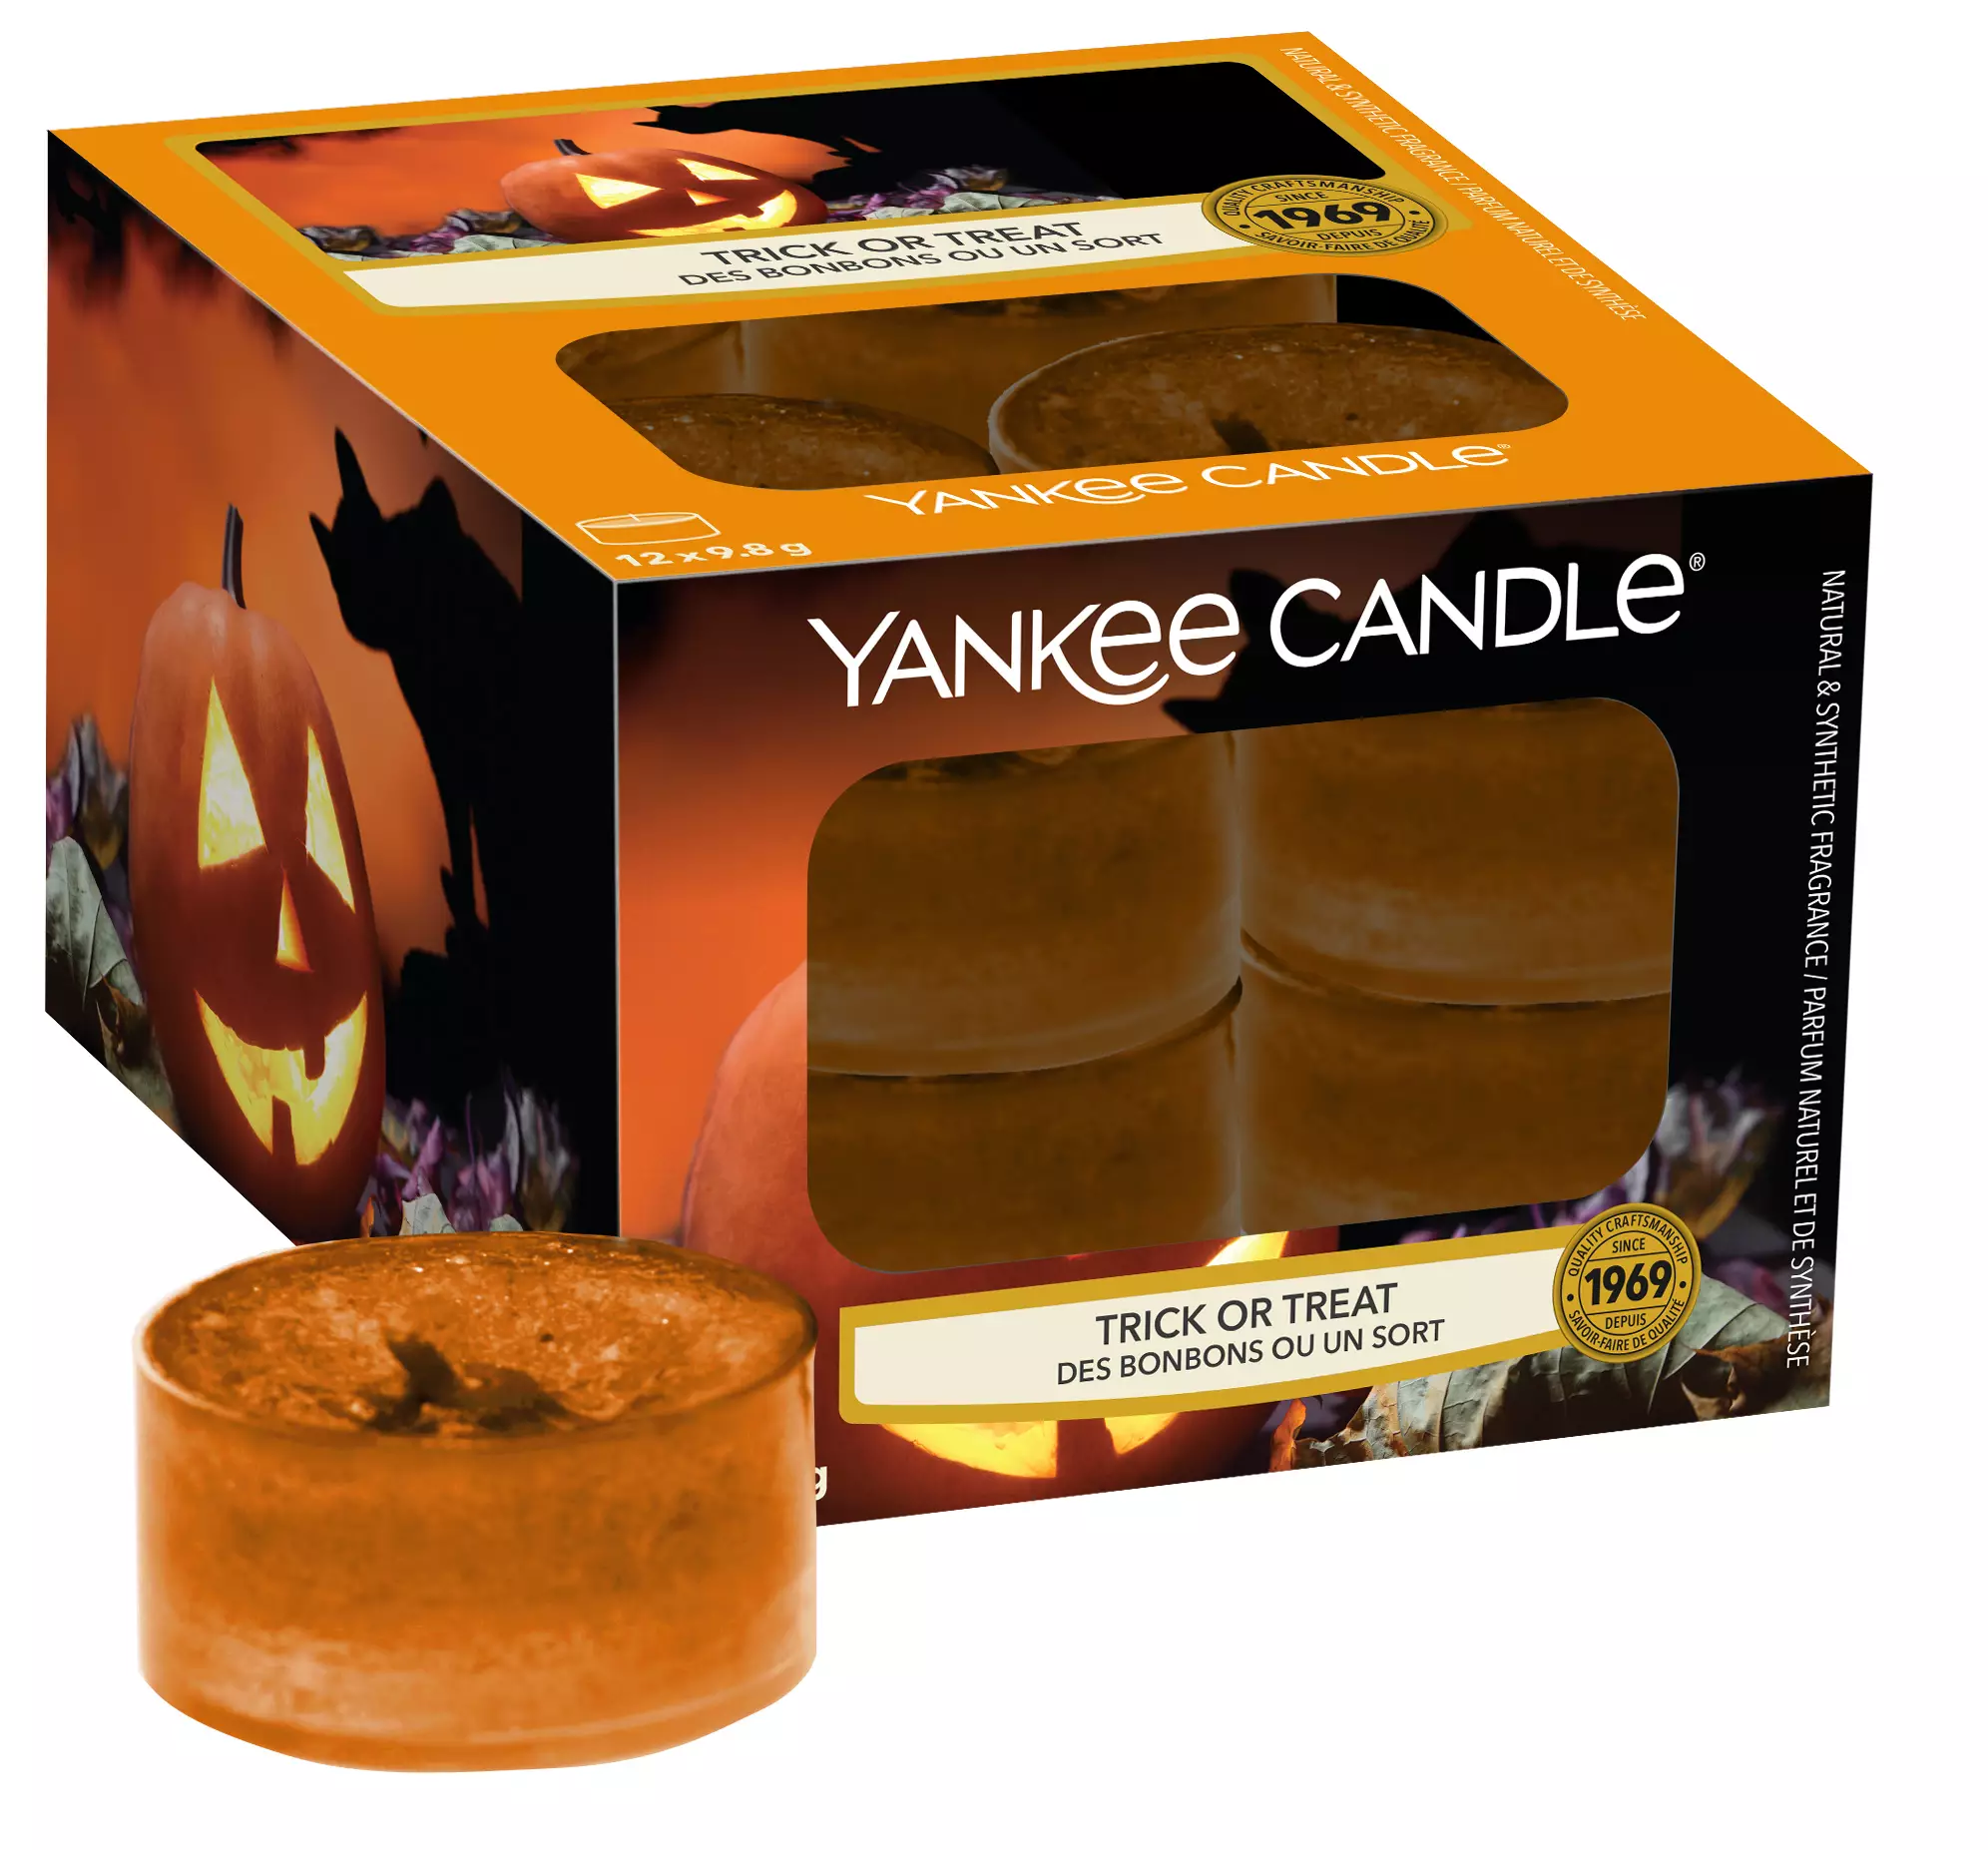 Trick or Treat captures the smell of a crisp autumn night